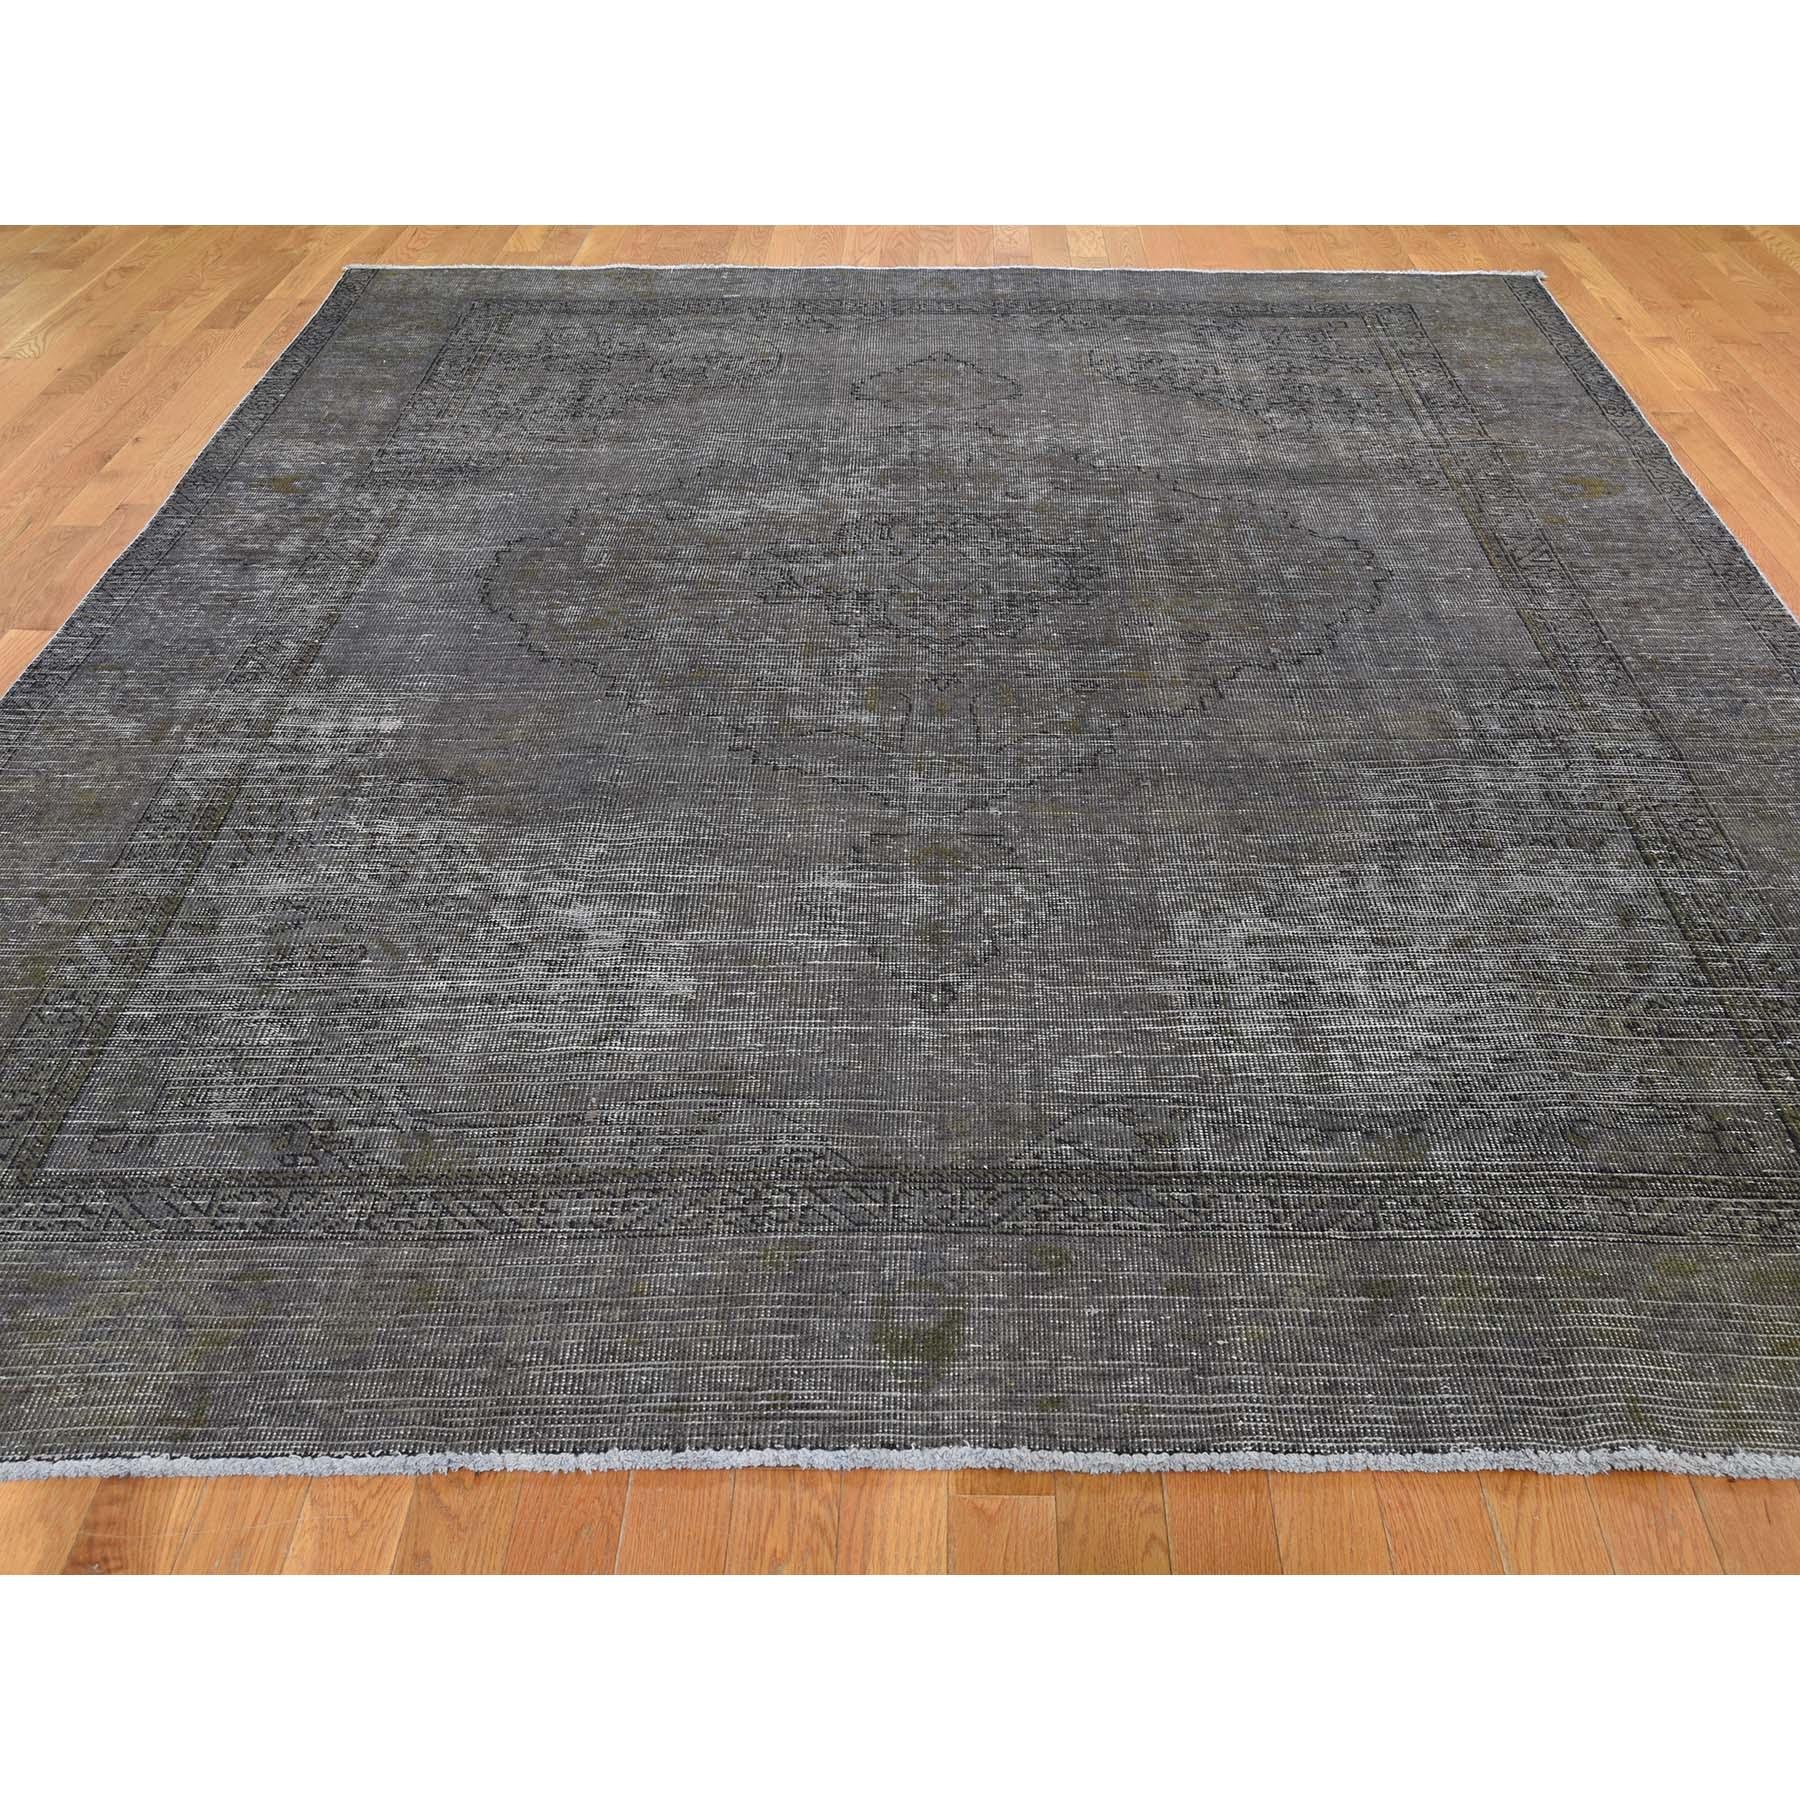 Afghan Grey Overdyed Persian Tabriz Worn Pile Hand Knotted Oriental Rug